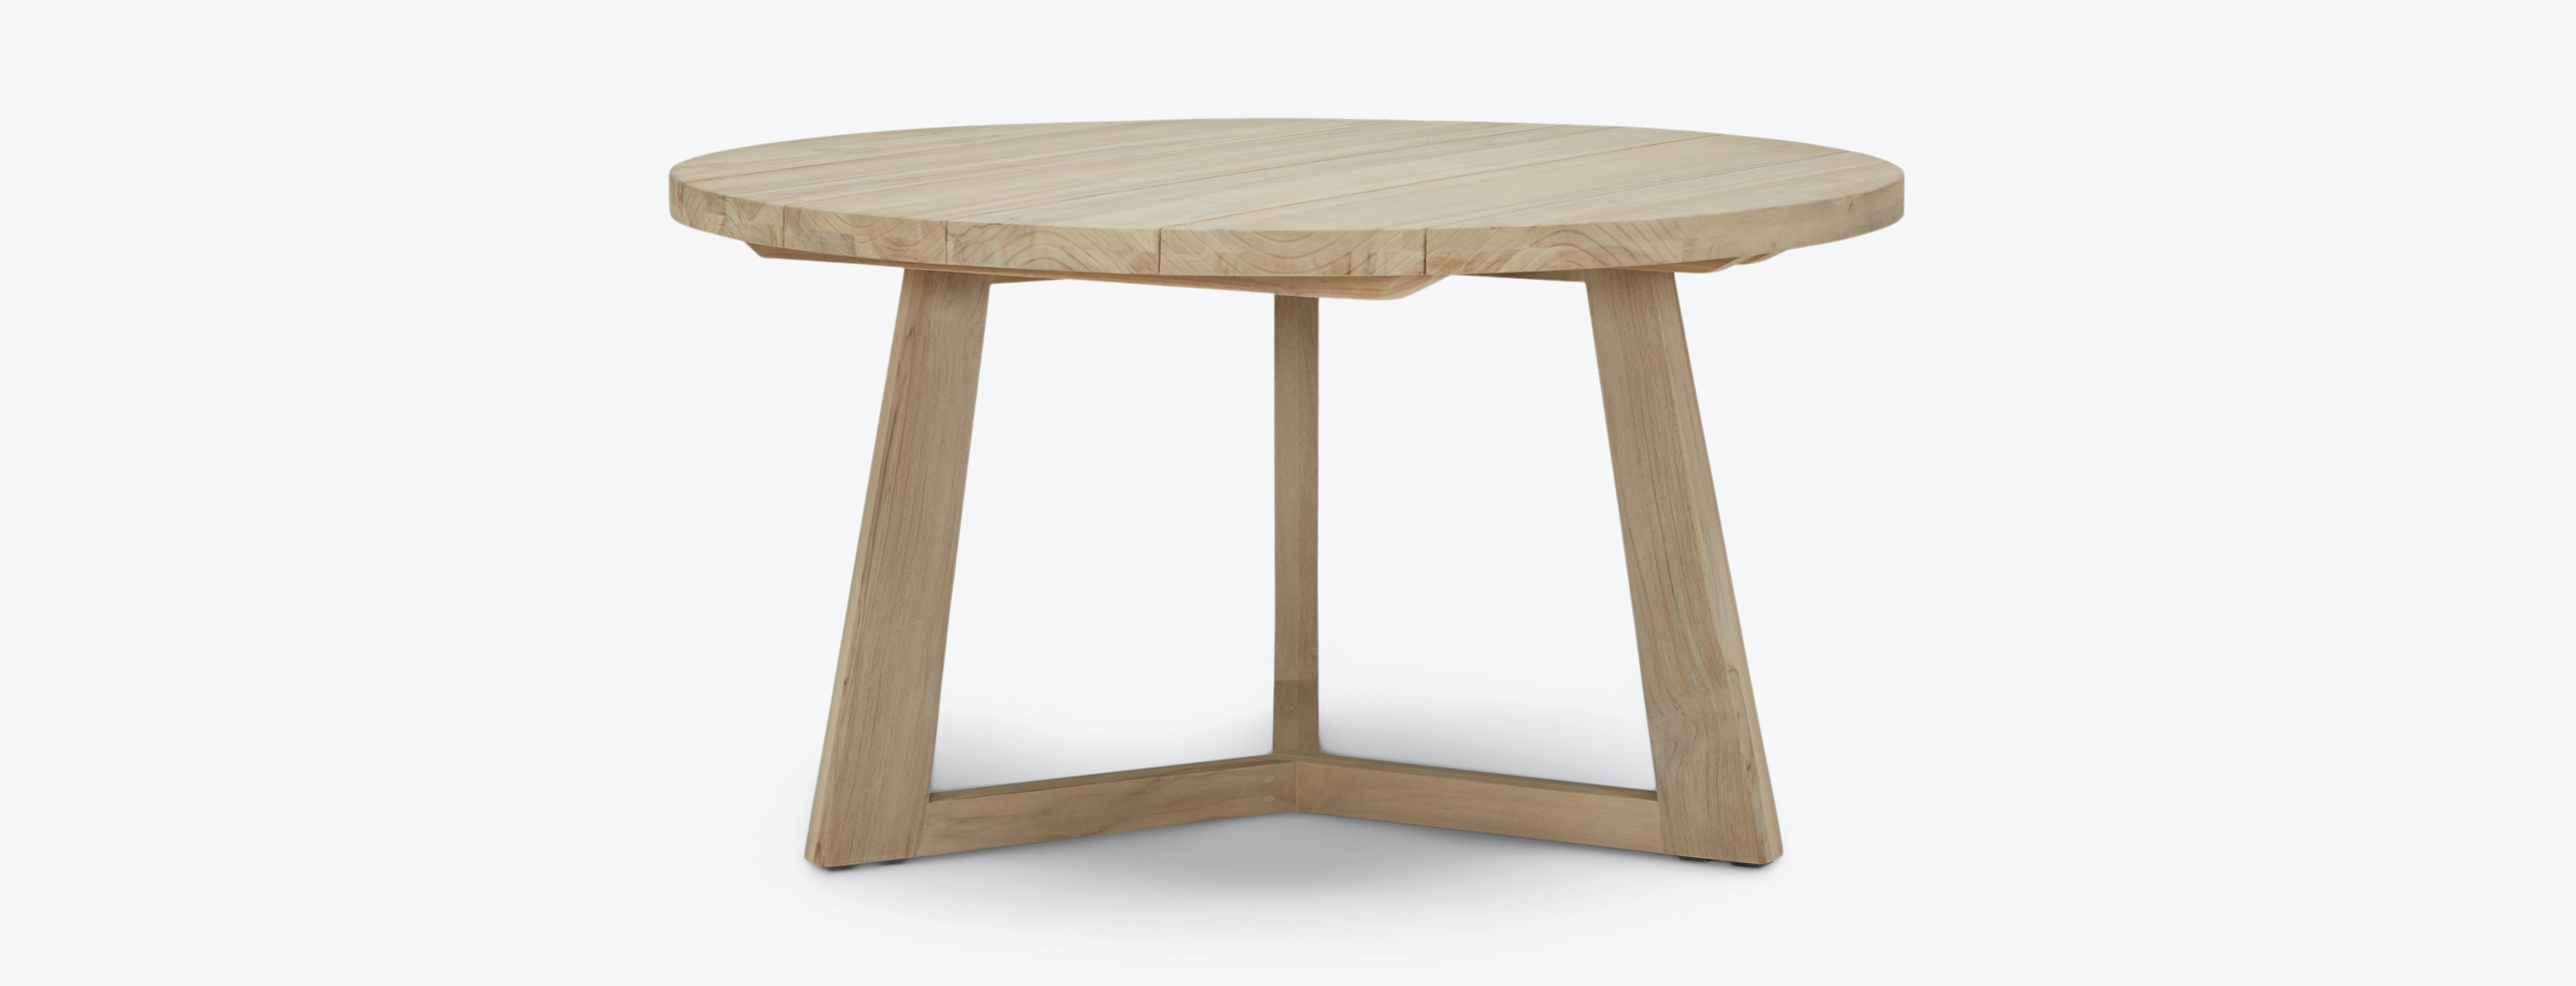 Laguna Outdoor Dining Table - Image 0